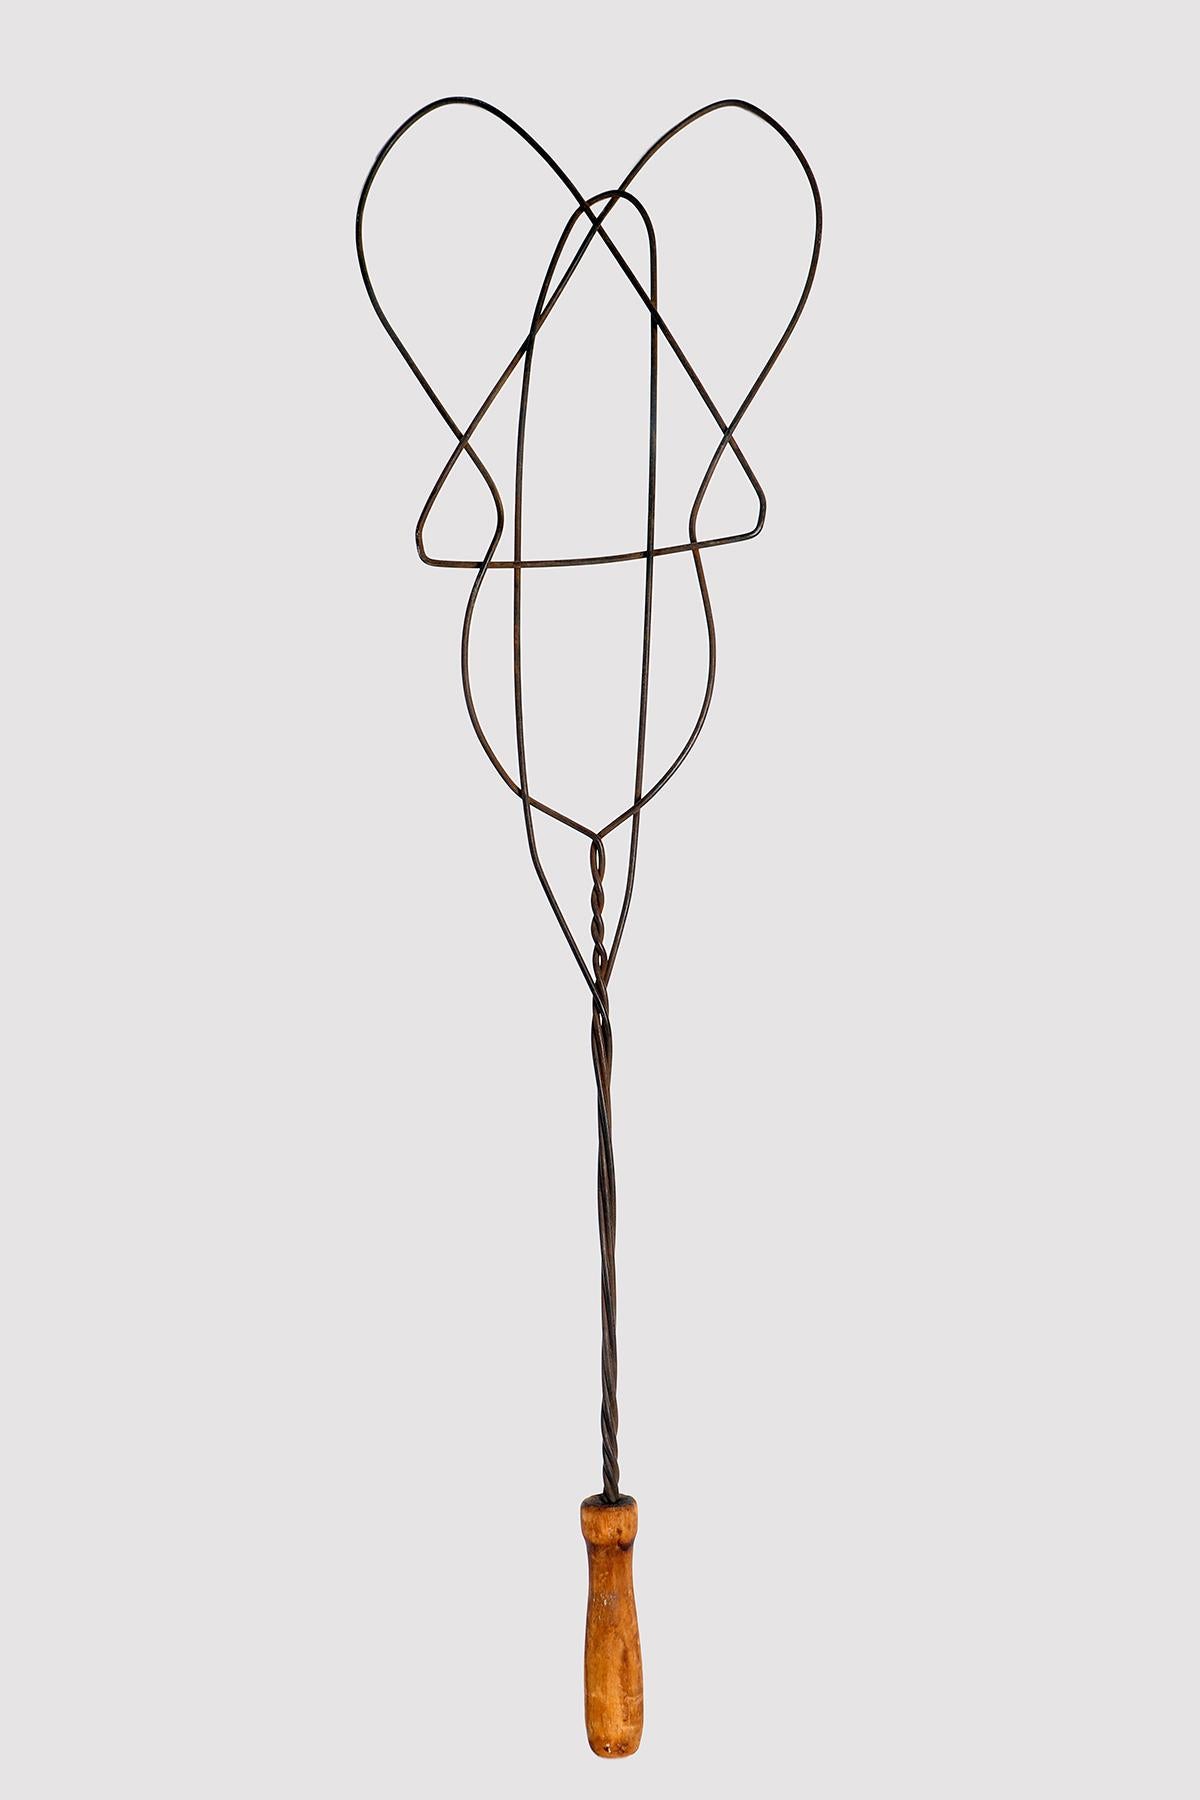 Antique carpet beater, to remove dust from carpets, in the shape of a guitar in heavy twisted metal wire woven into a honeycomb, to obtain greater resistance. The handle is made of fruit wood. United Kingdom, dating back to the late 1800s.